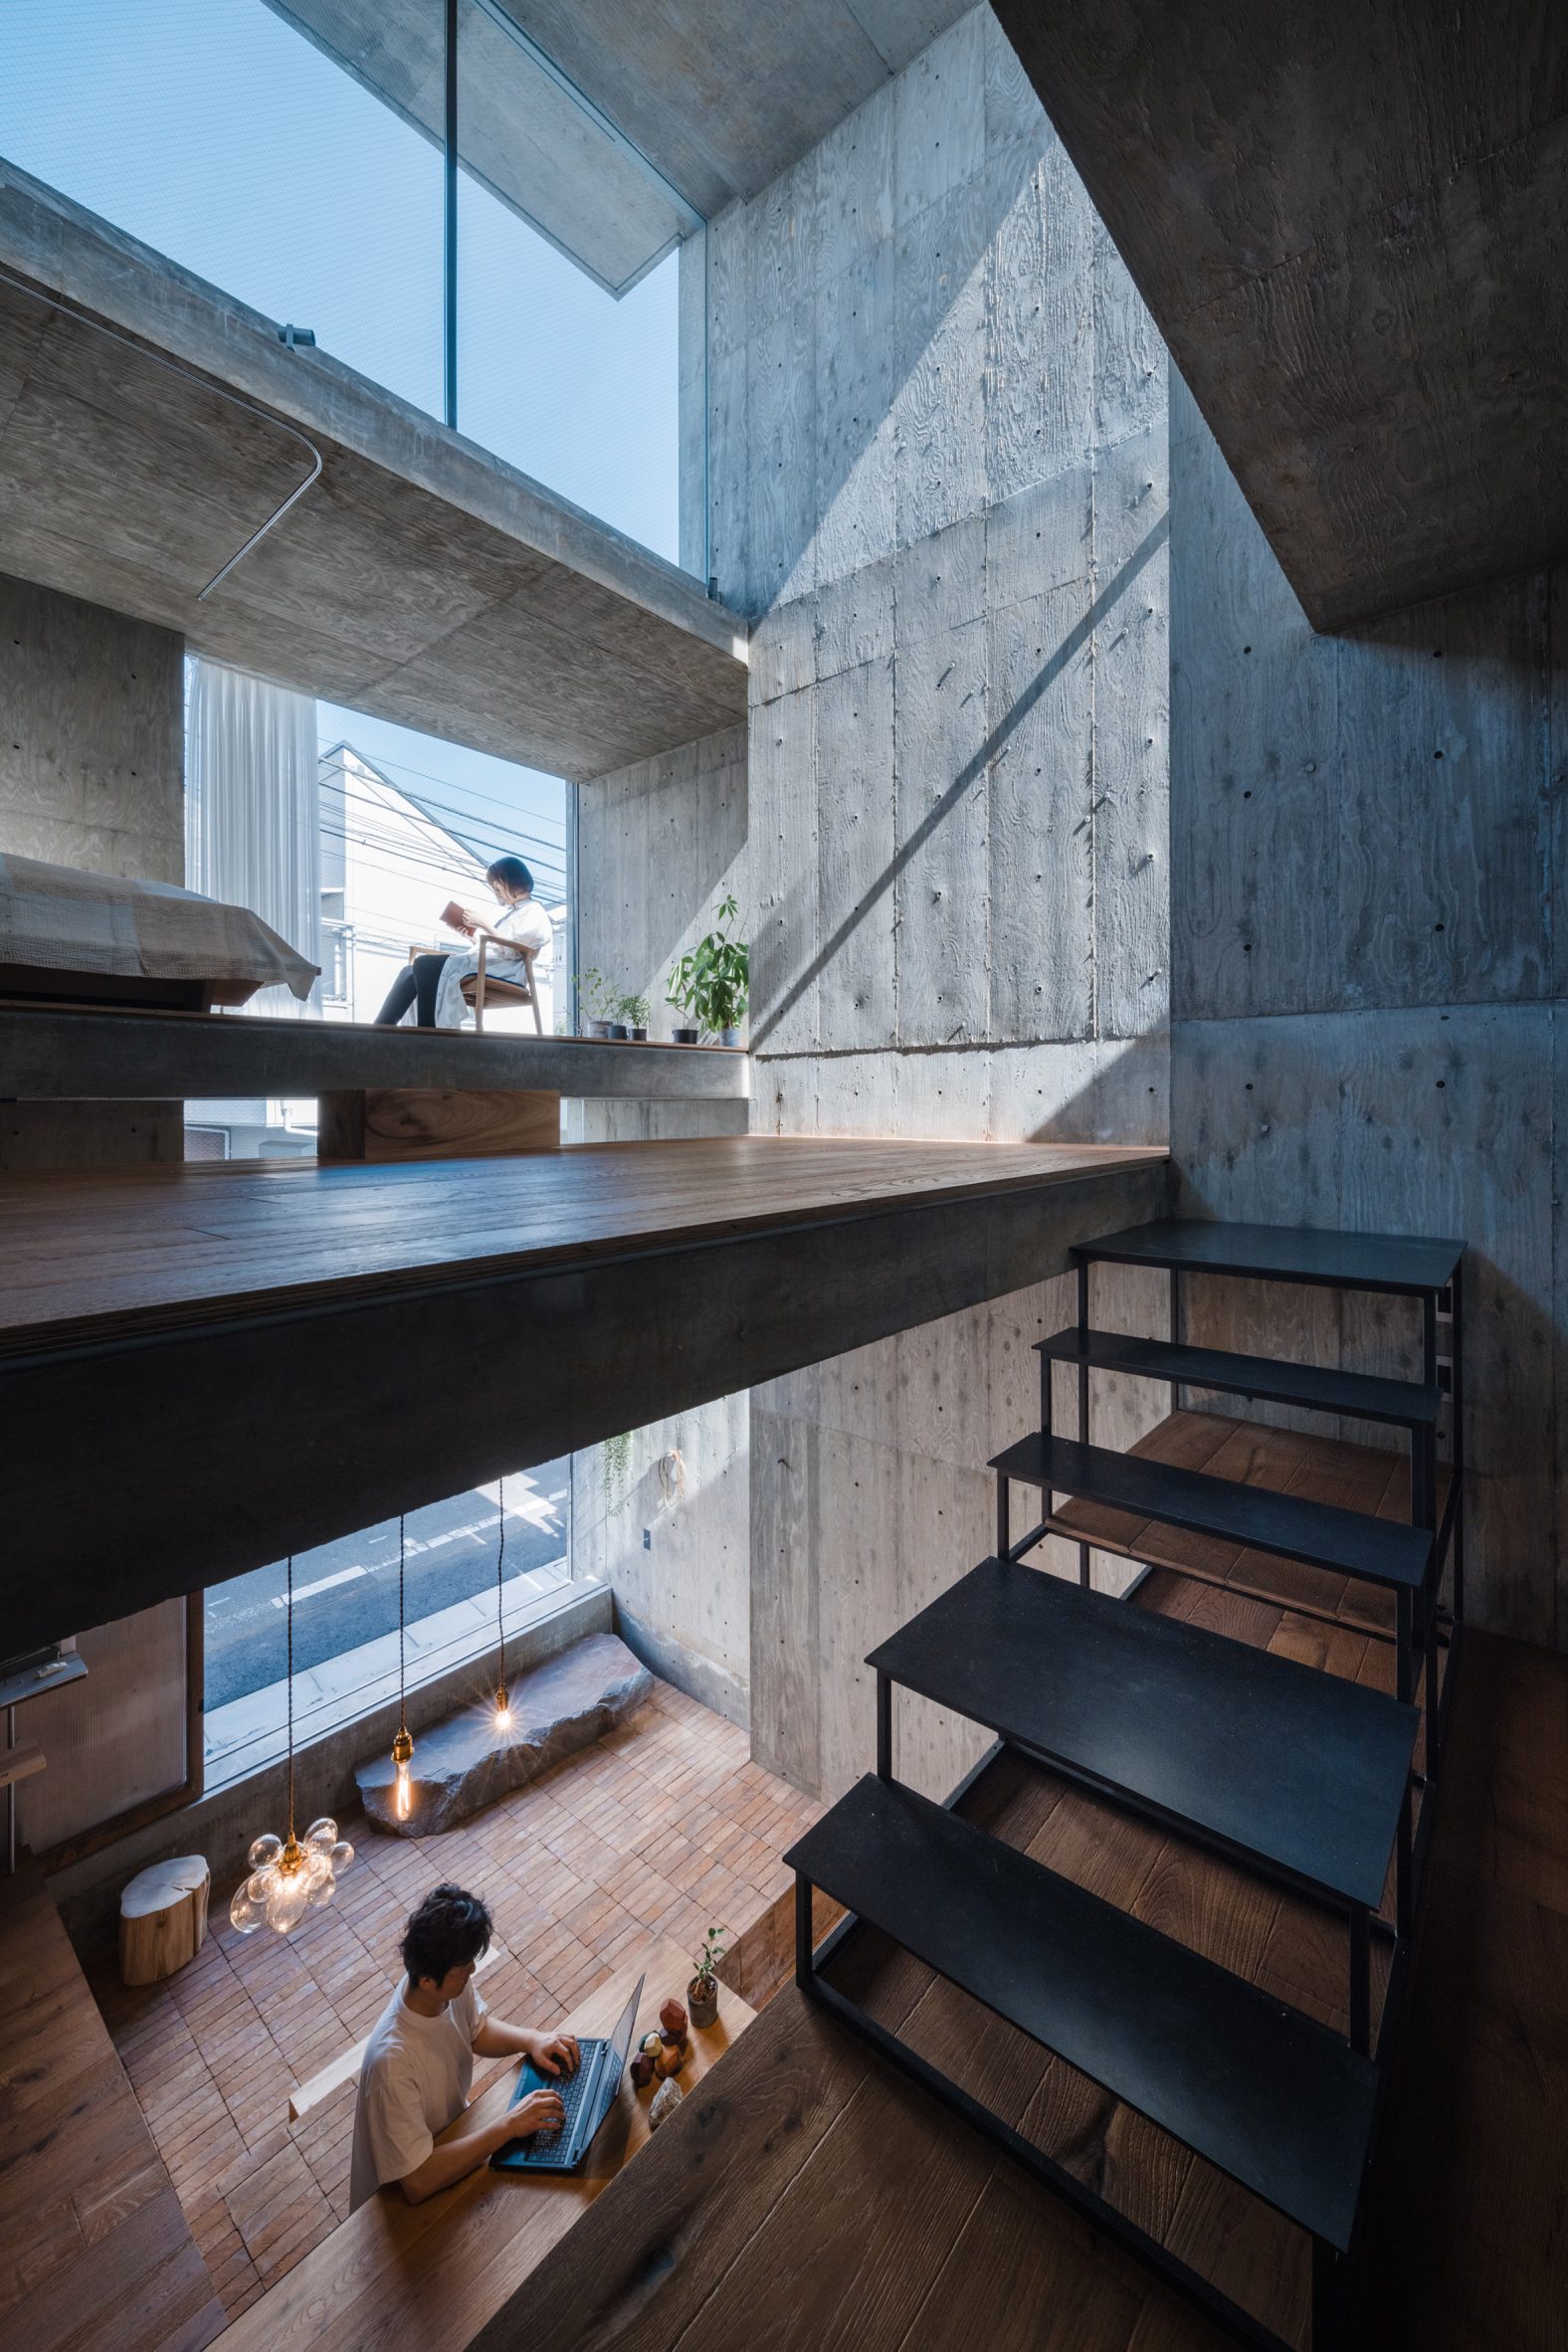 Interior of Building Frame of the House by IGArchitects